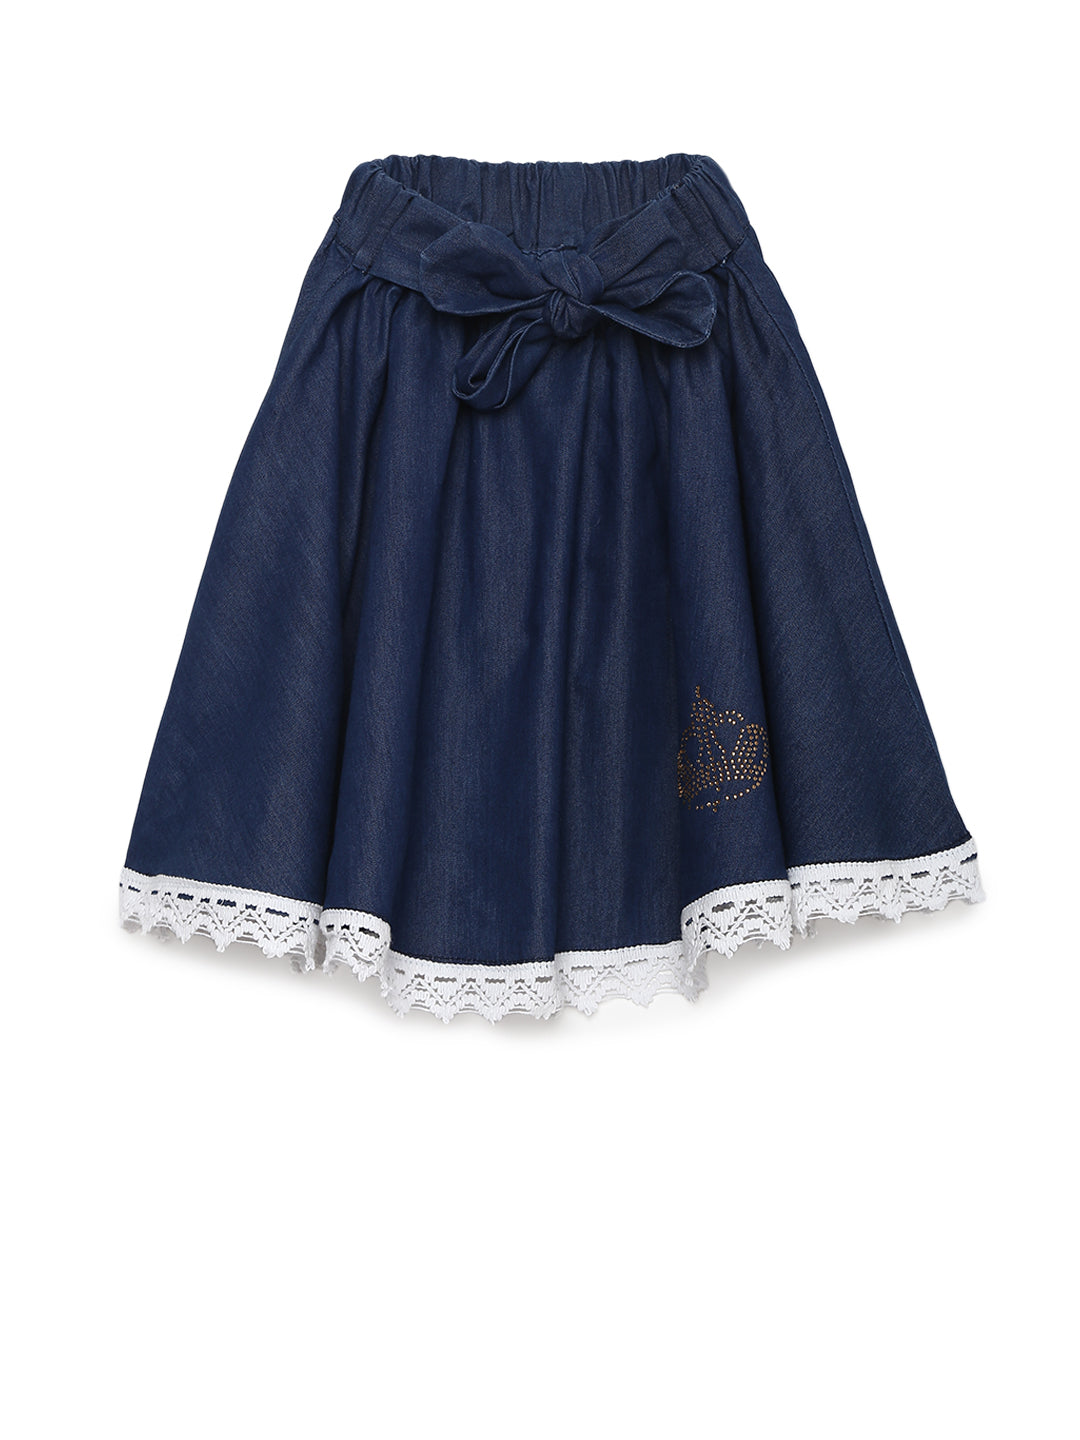 Gilr's Denim Skirt With Bow Tie Belt And Embellished Patch - StyleStone Kid